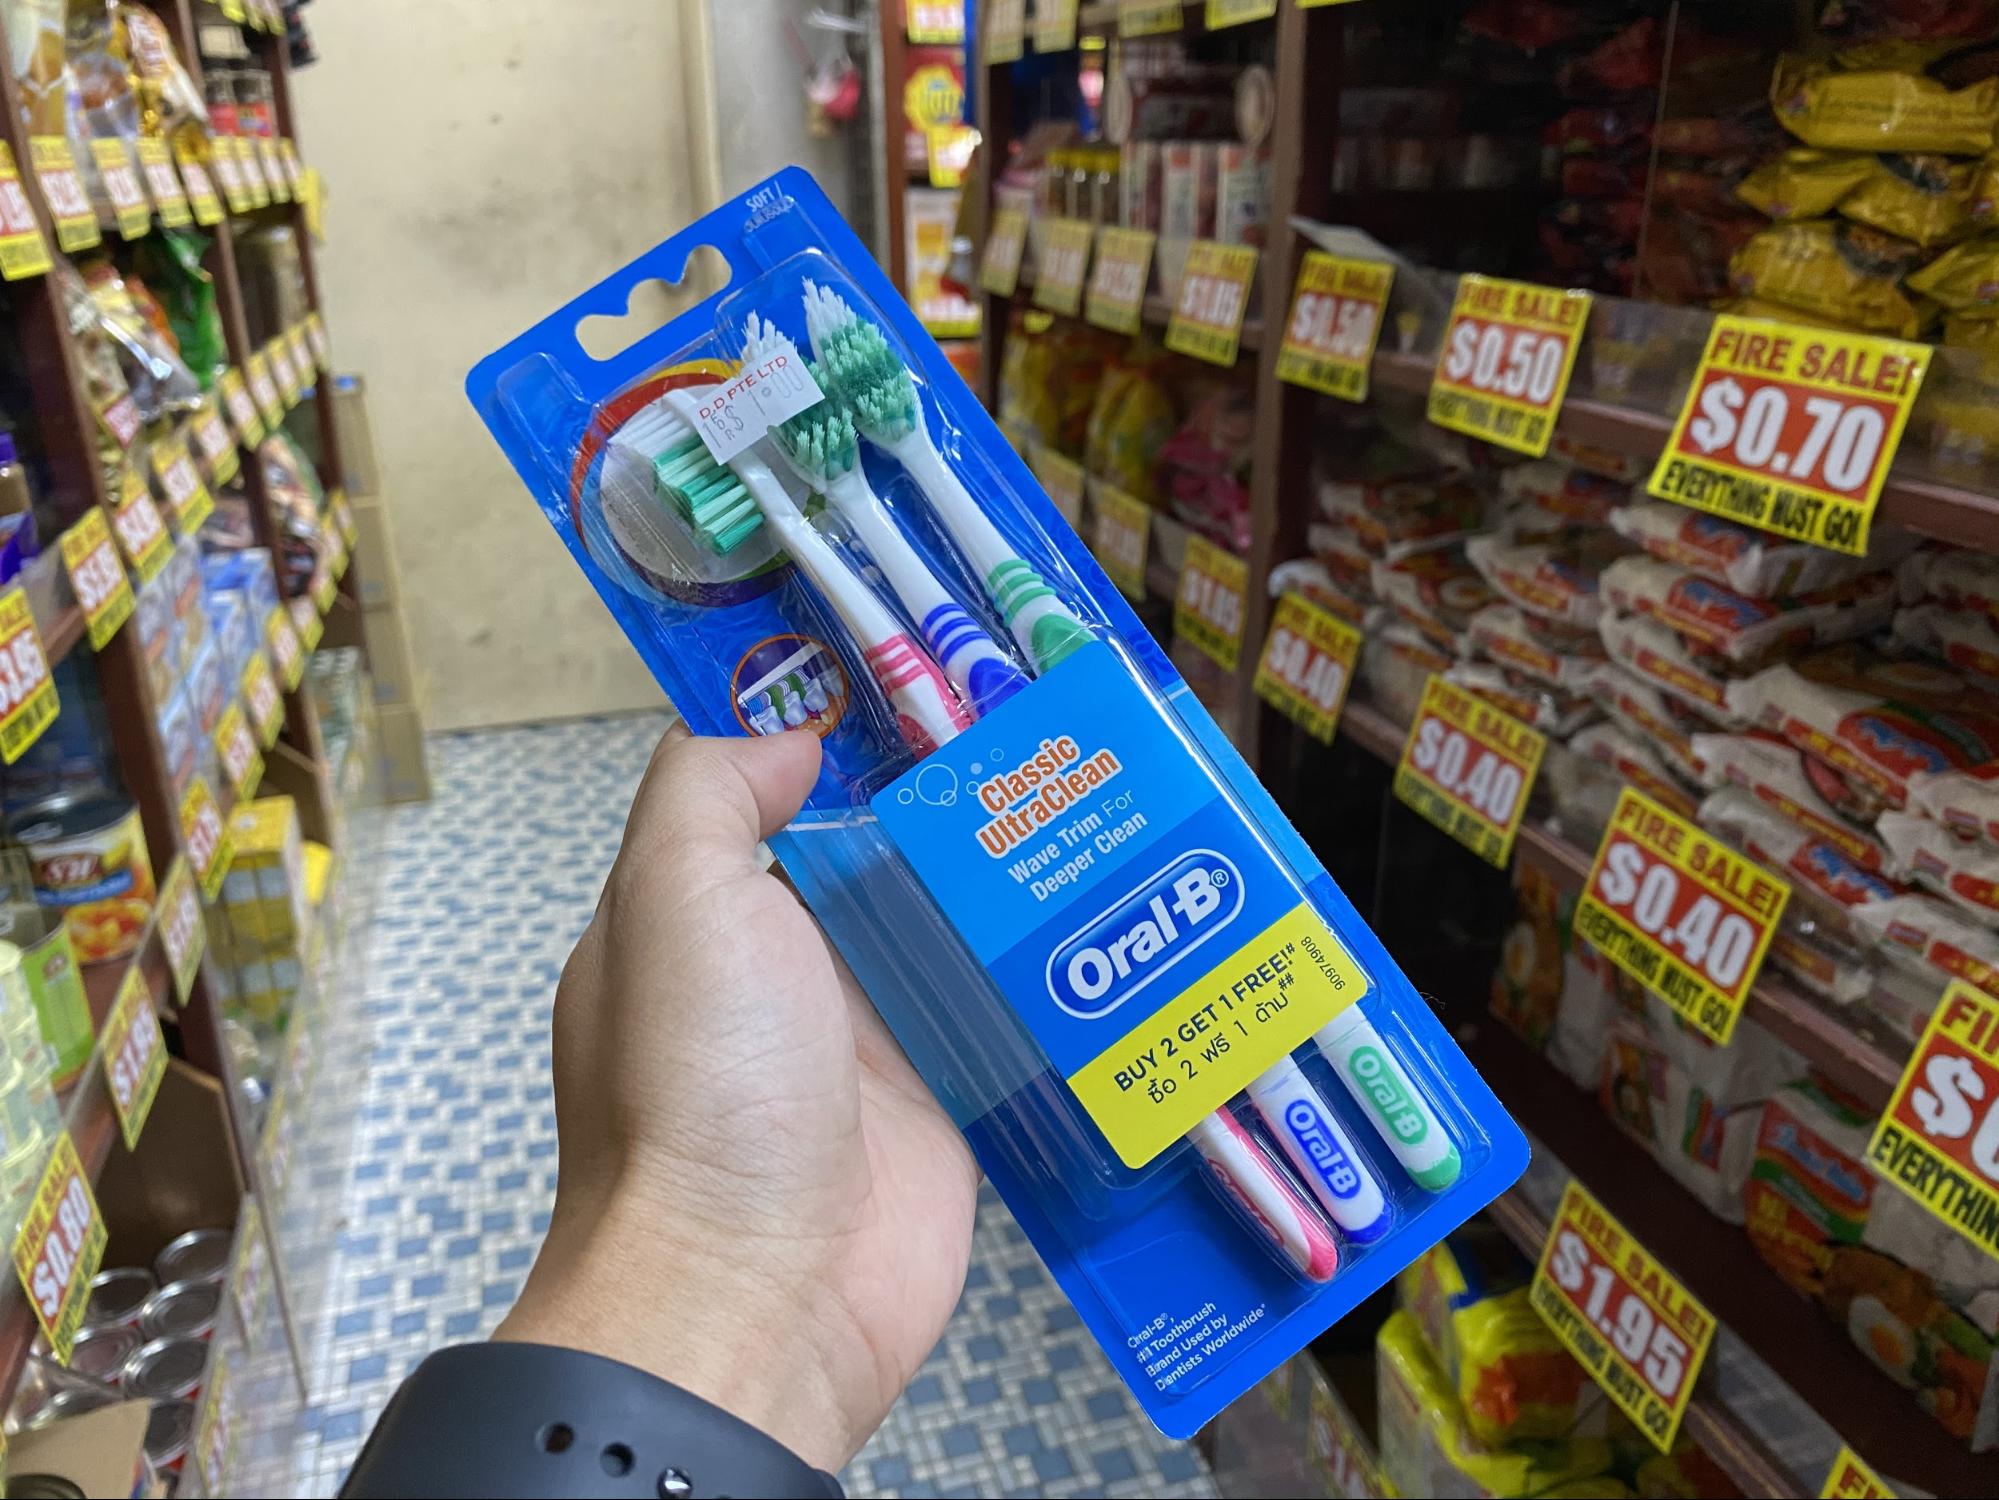 Oral-B toothbrushes at the value dollar store.